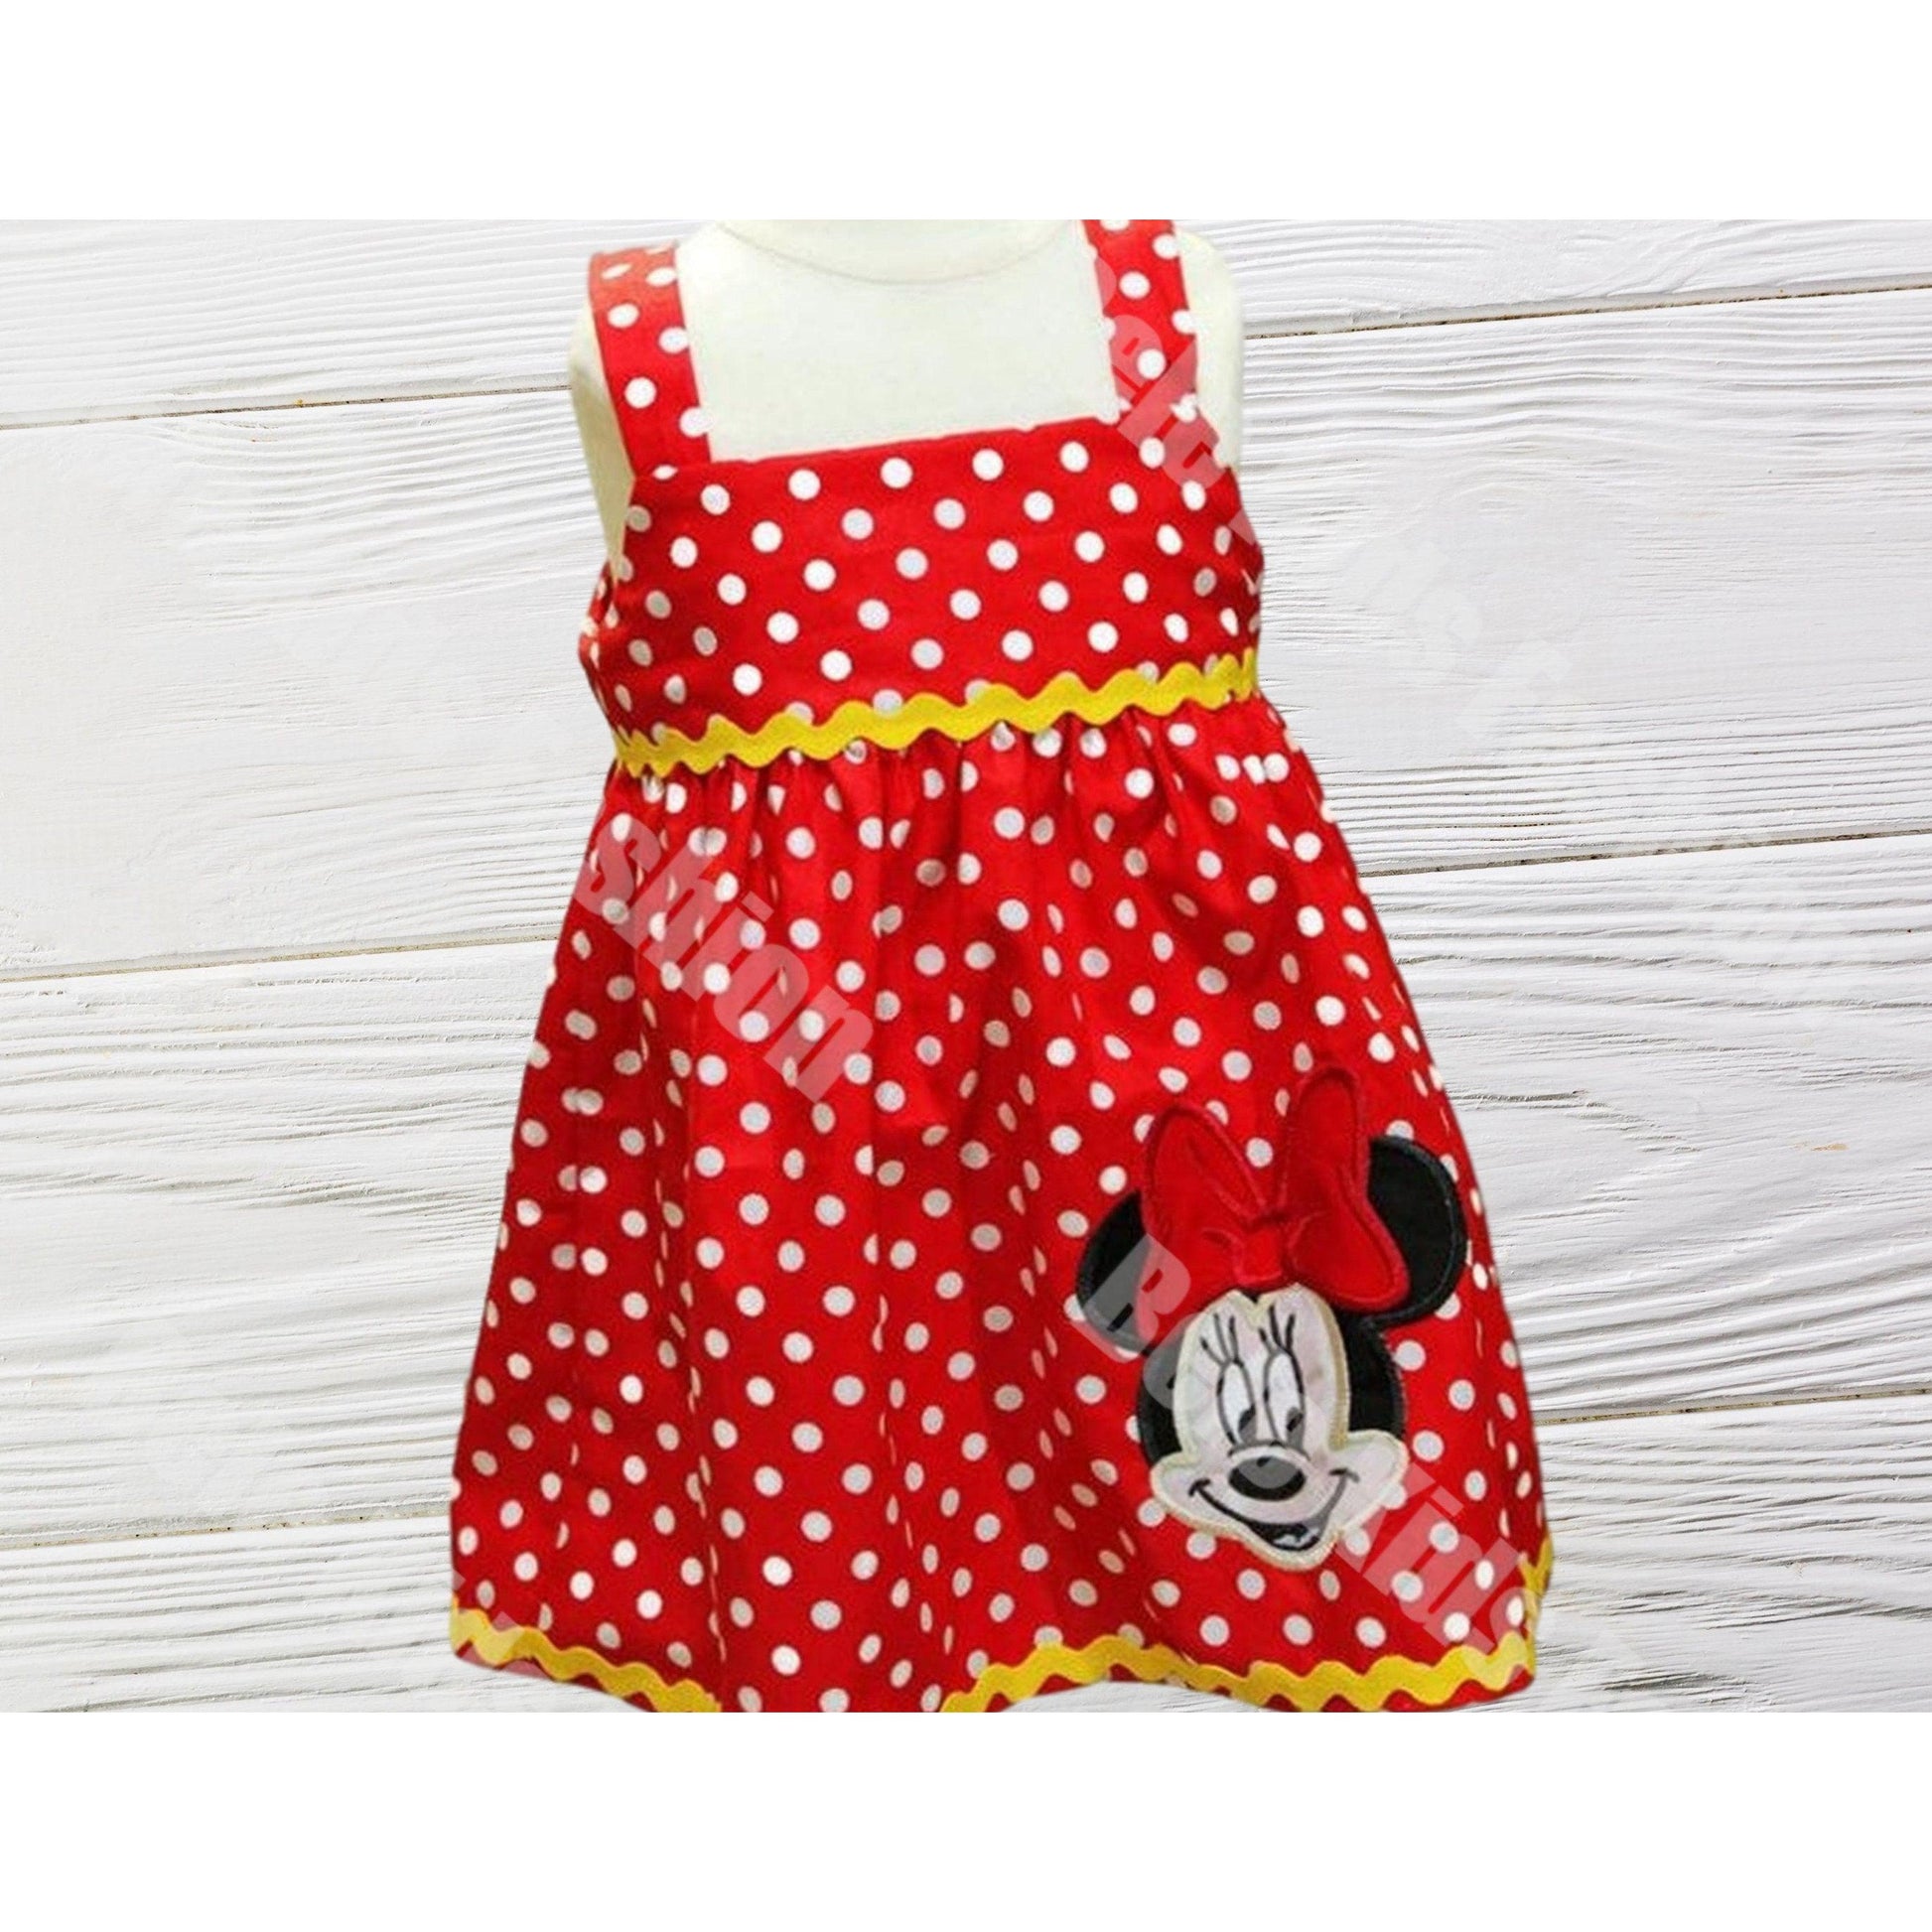 Minnie Mouse dress girl, Red Polka Dot fabric dress , First Birthday  